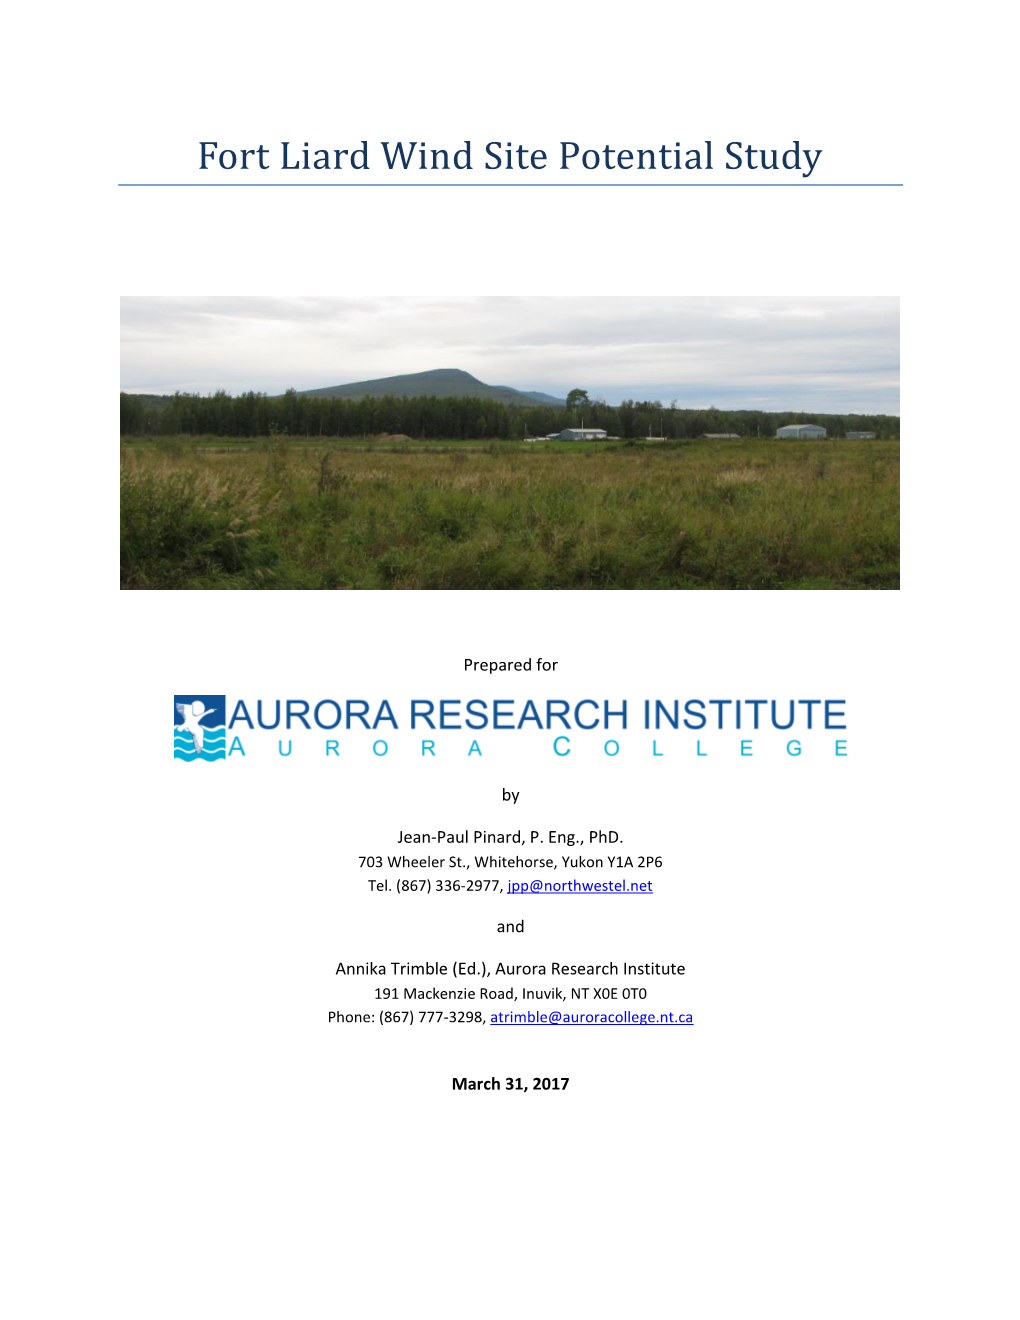 Fort Liard Wind Site Potential Study